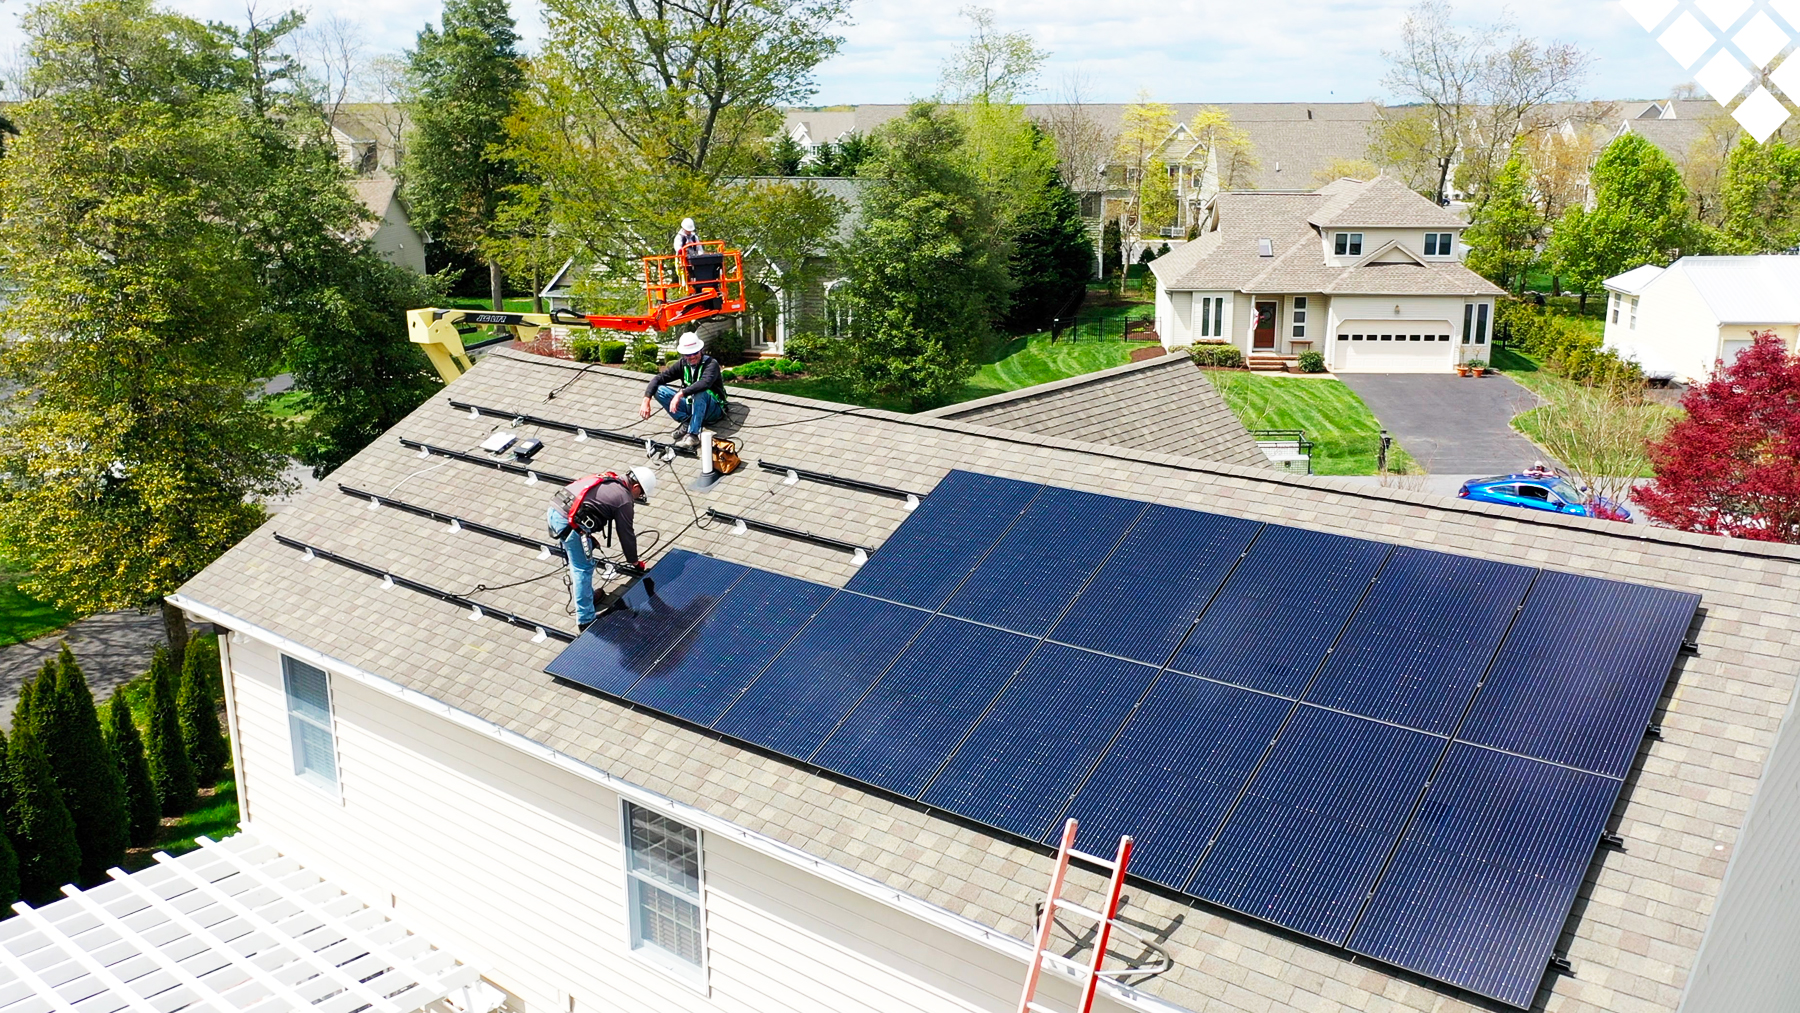 Installing solar panels on your home